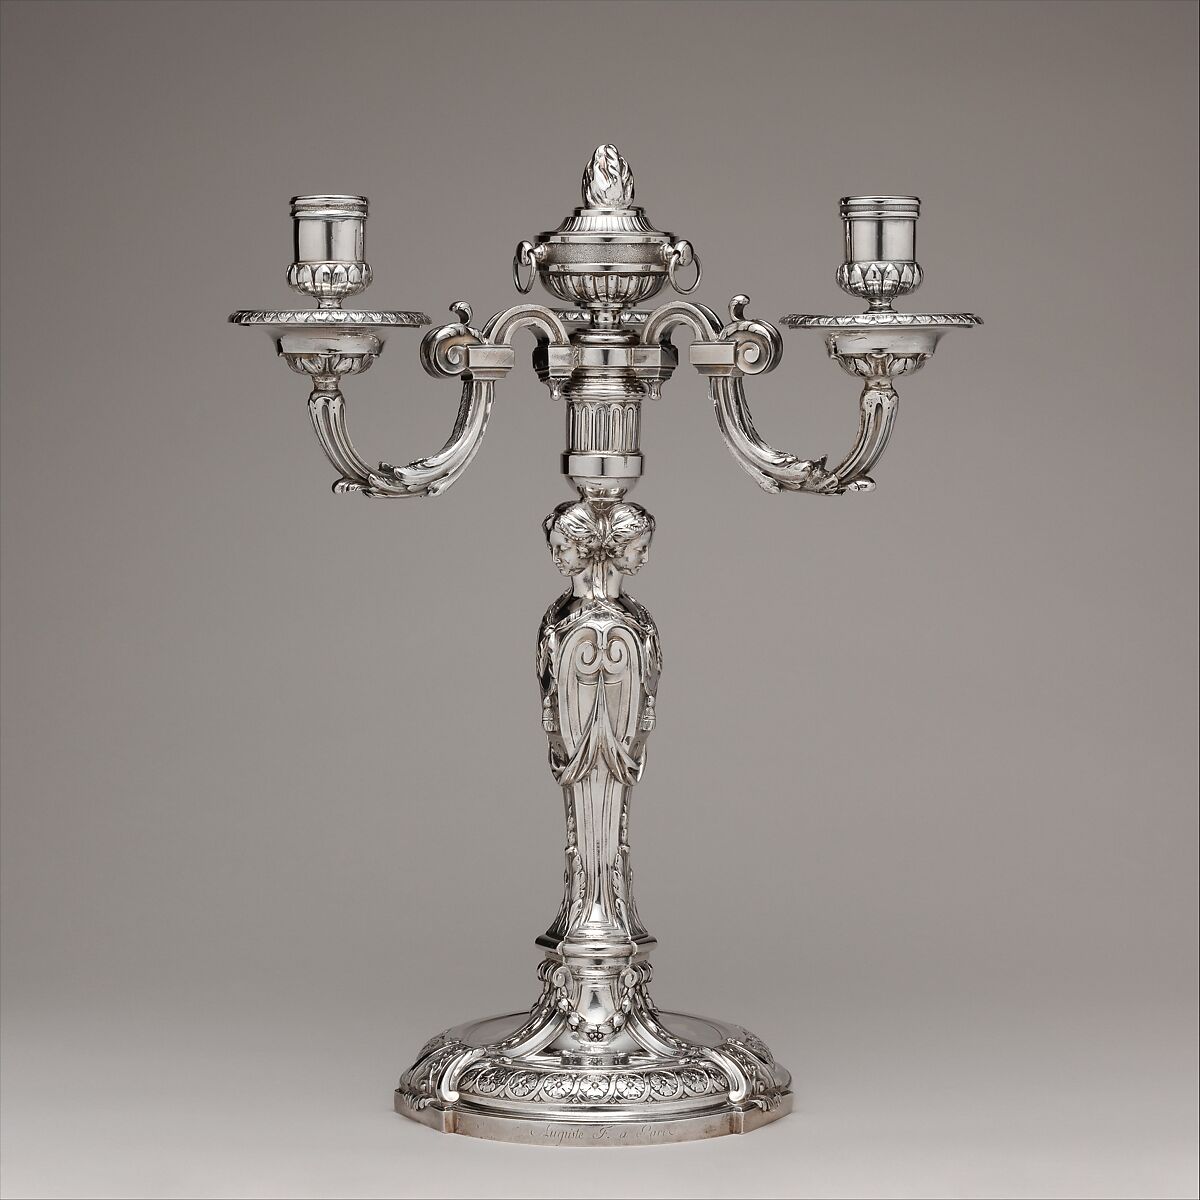 Candelabrum (one of a pair), Robert Joseph Auguste  French, Silver, French, Paris